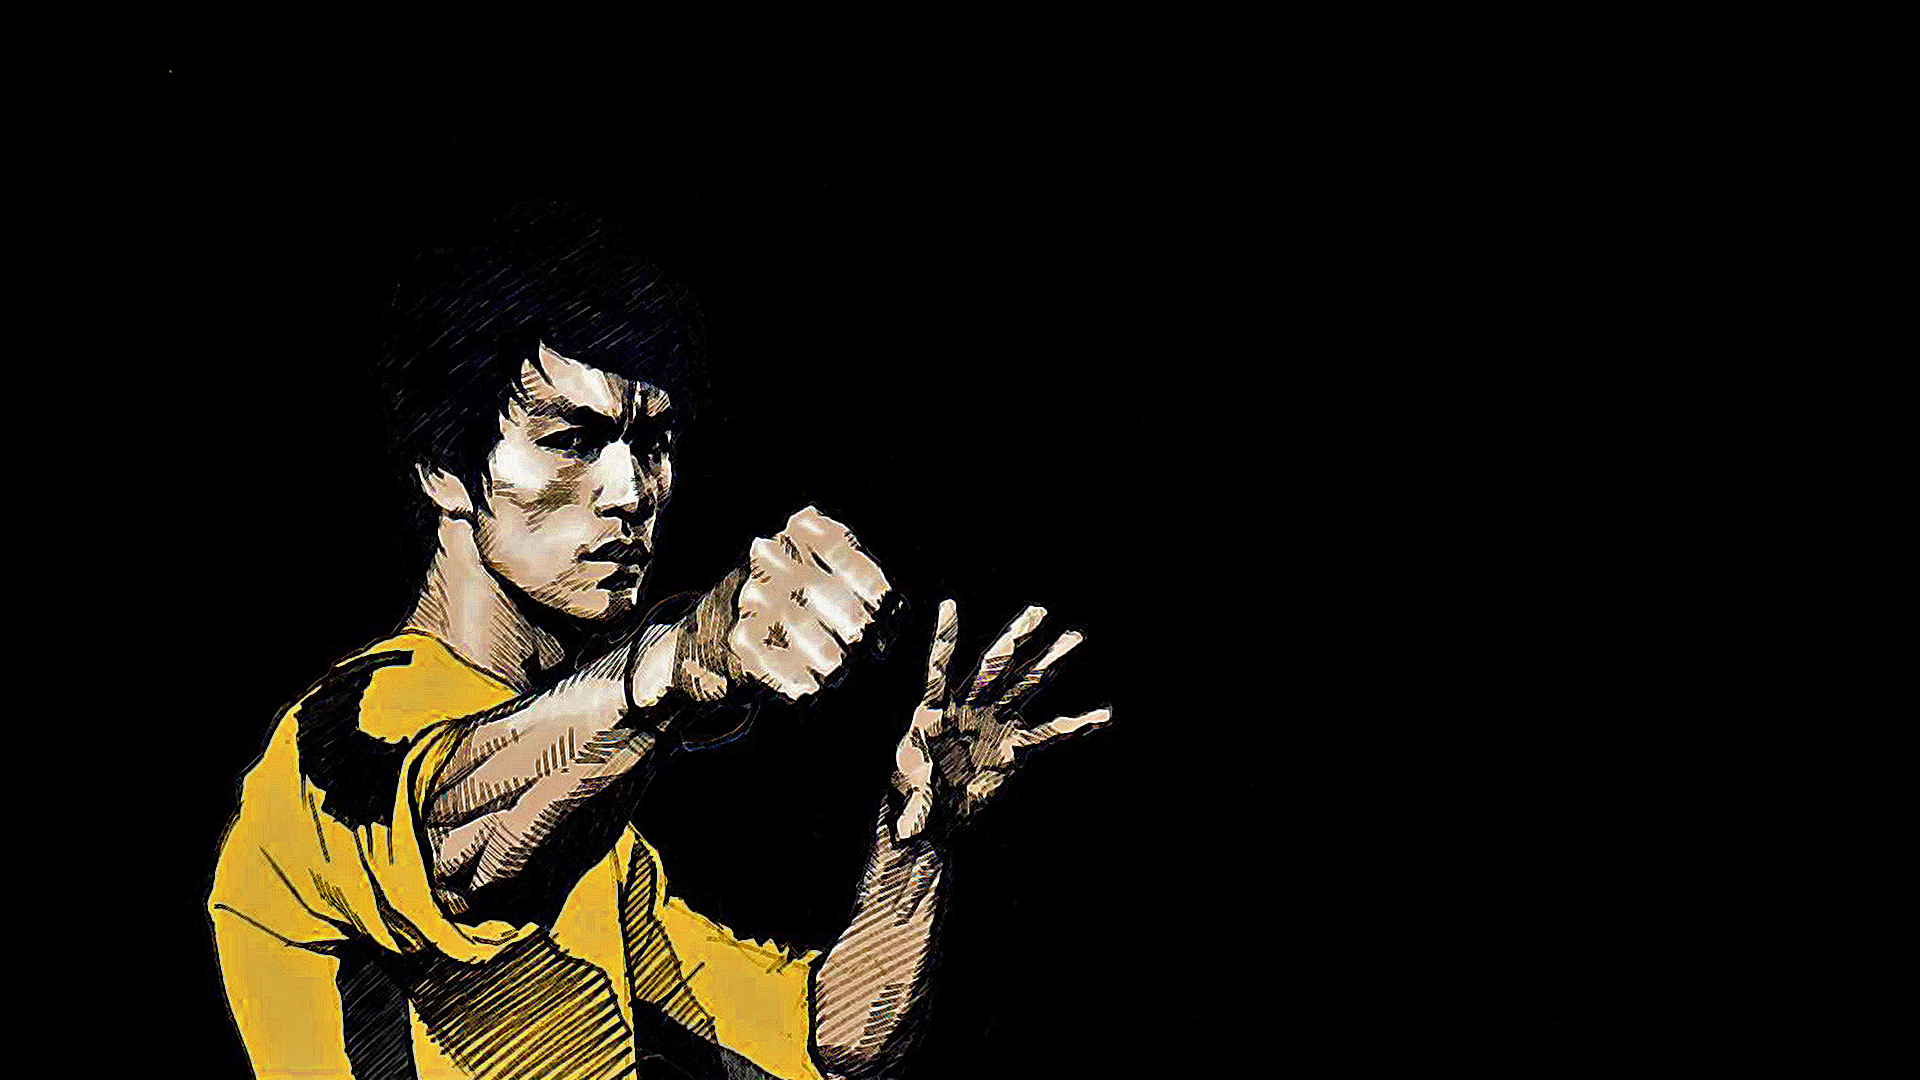 bruce lee hd wallpaper,yellow,hand,music,fictional character,illustration